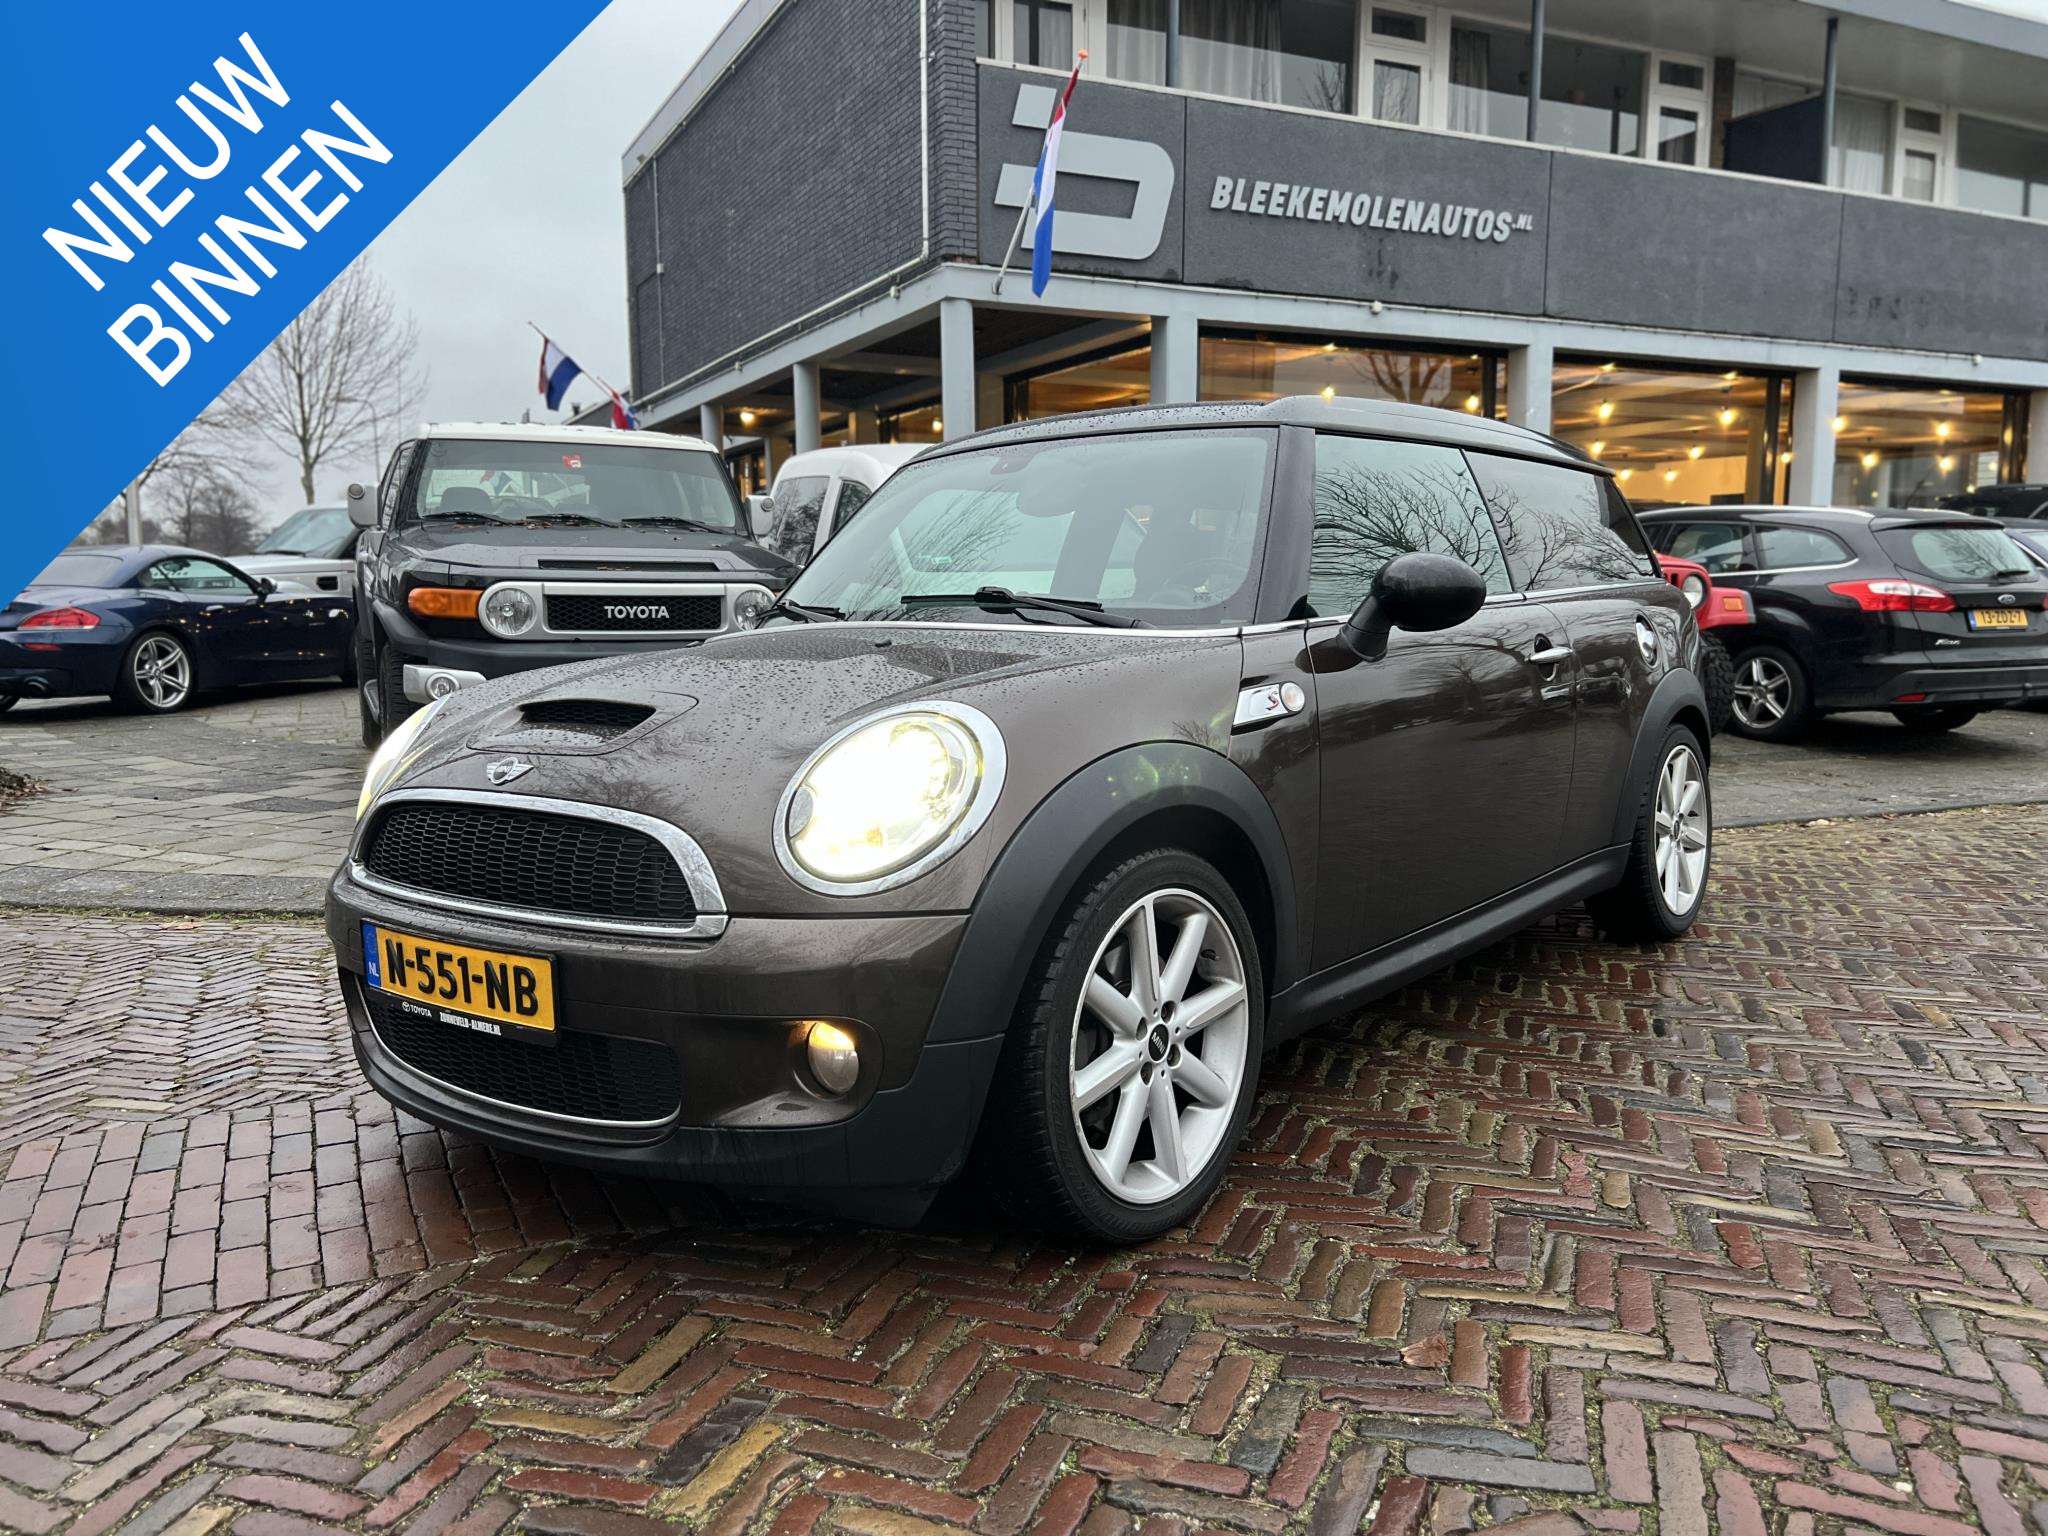 MINI Cooper S Compact in Brown used in HEEMSTEDE for € 9,500.-